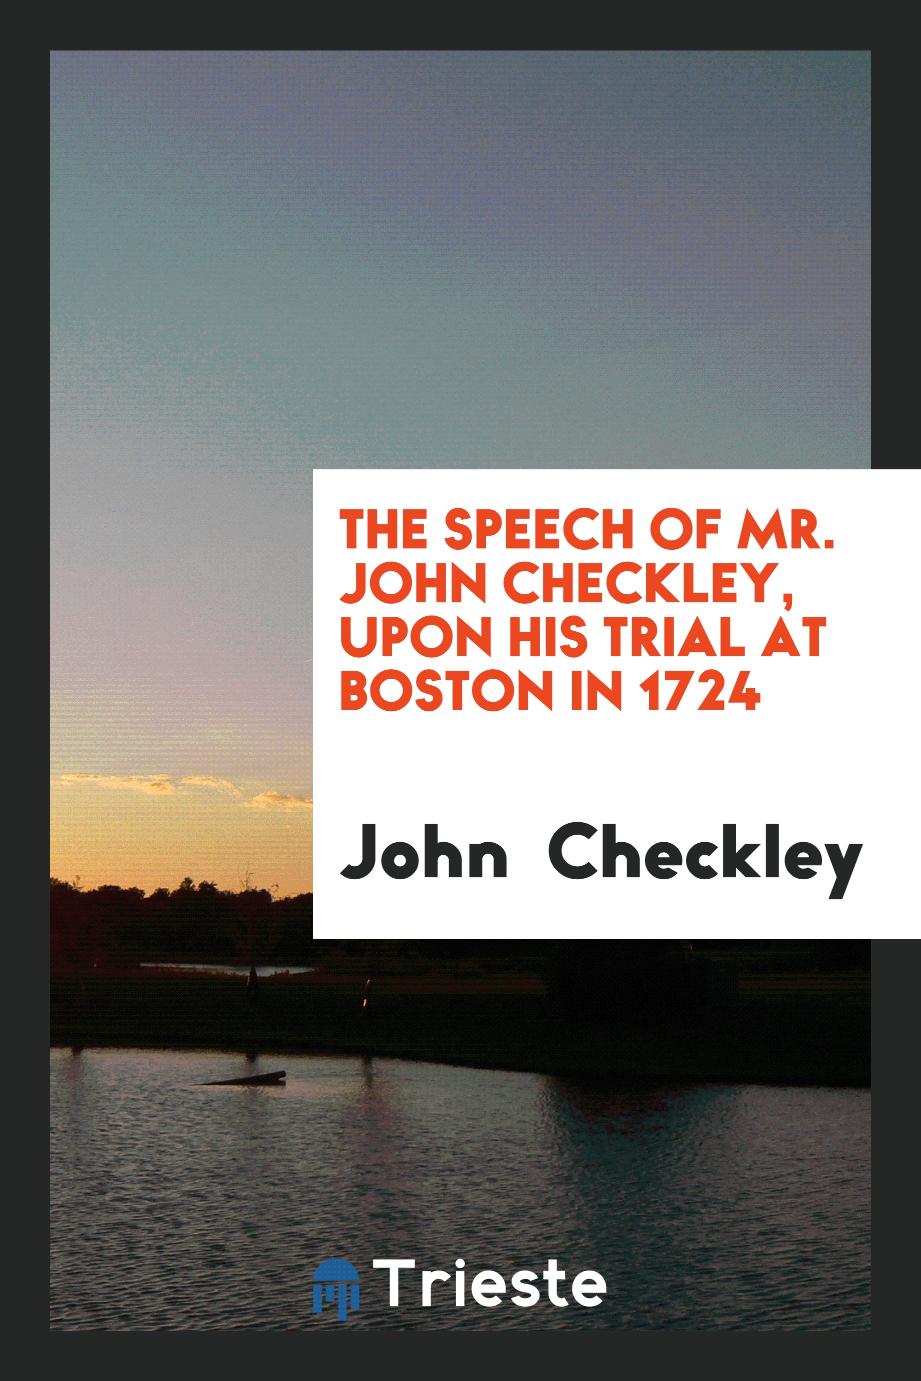 The Speech of Mr. John Checkley, upon his trial at Boston in 1724